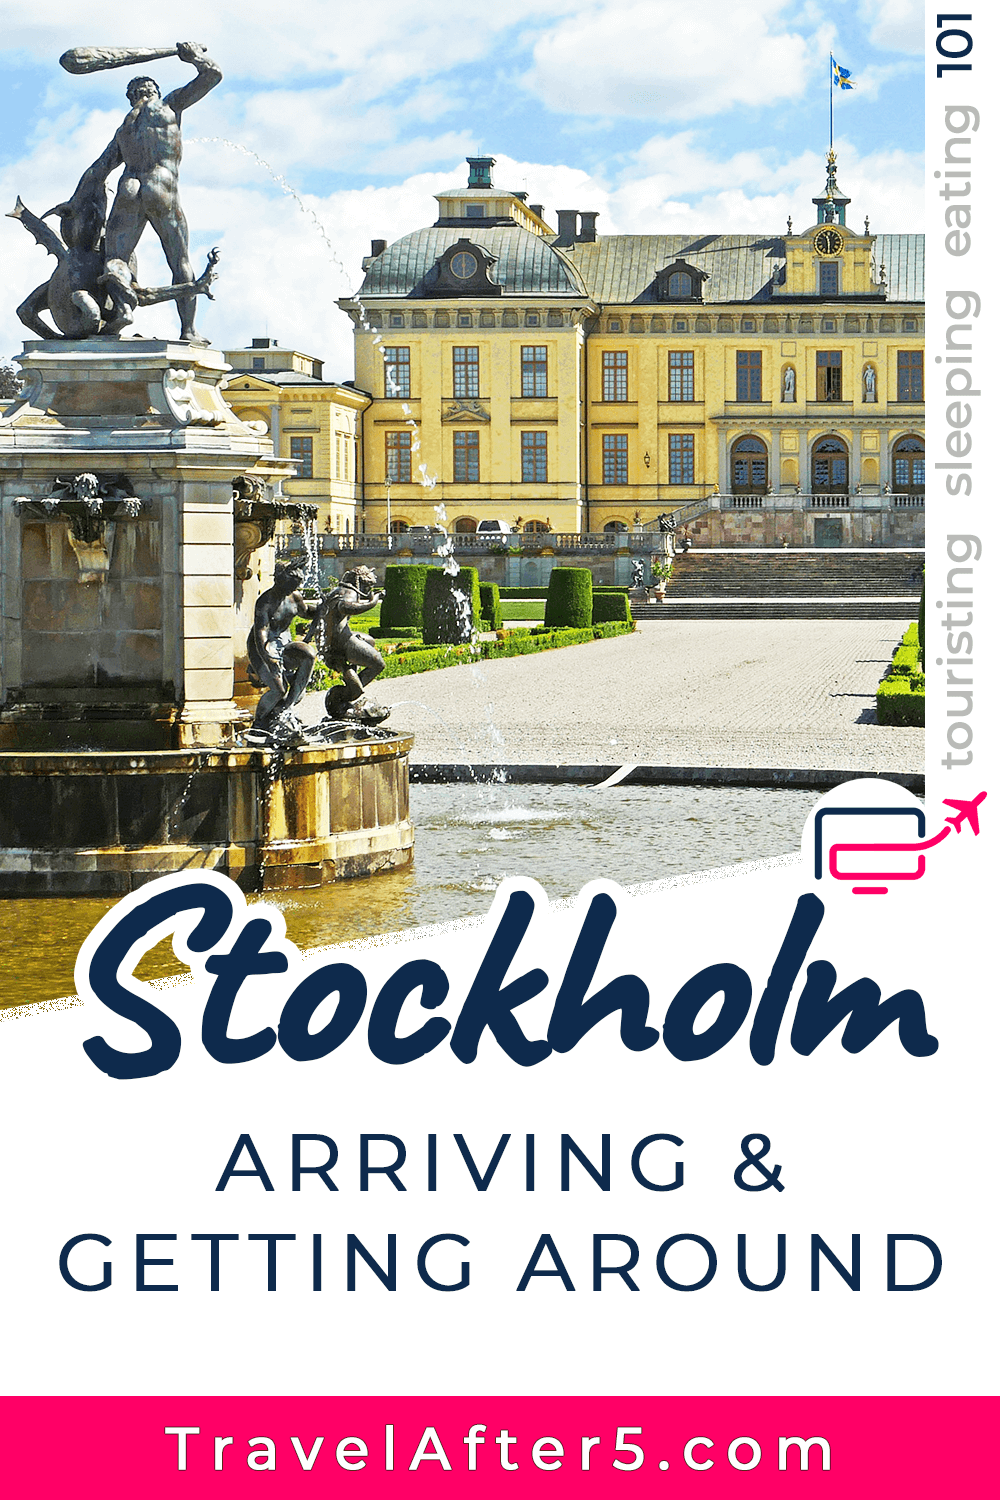 Pinterest Pin to Stockholm 101, Arriving & Getting Around, by Travel After 5